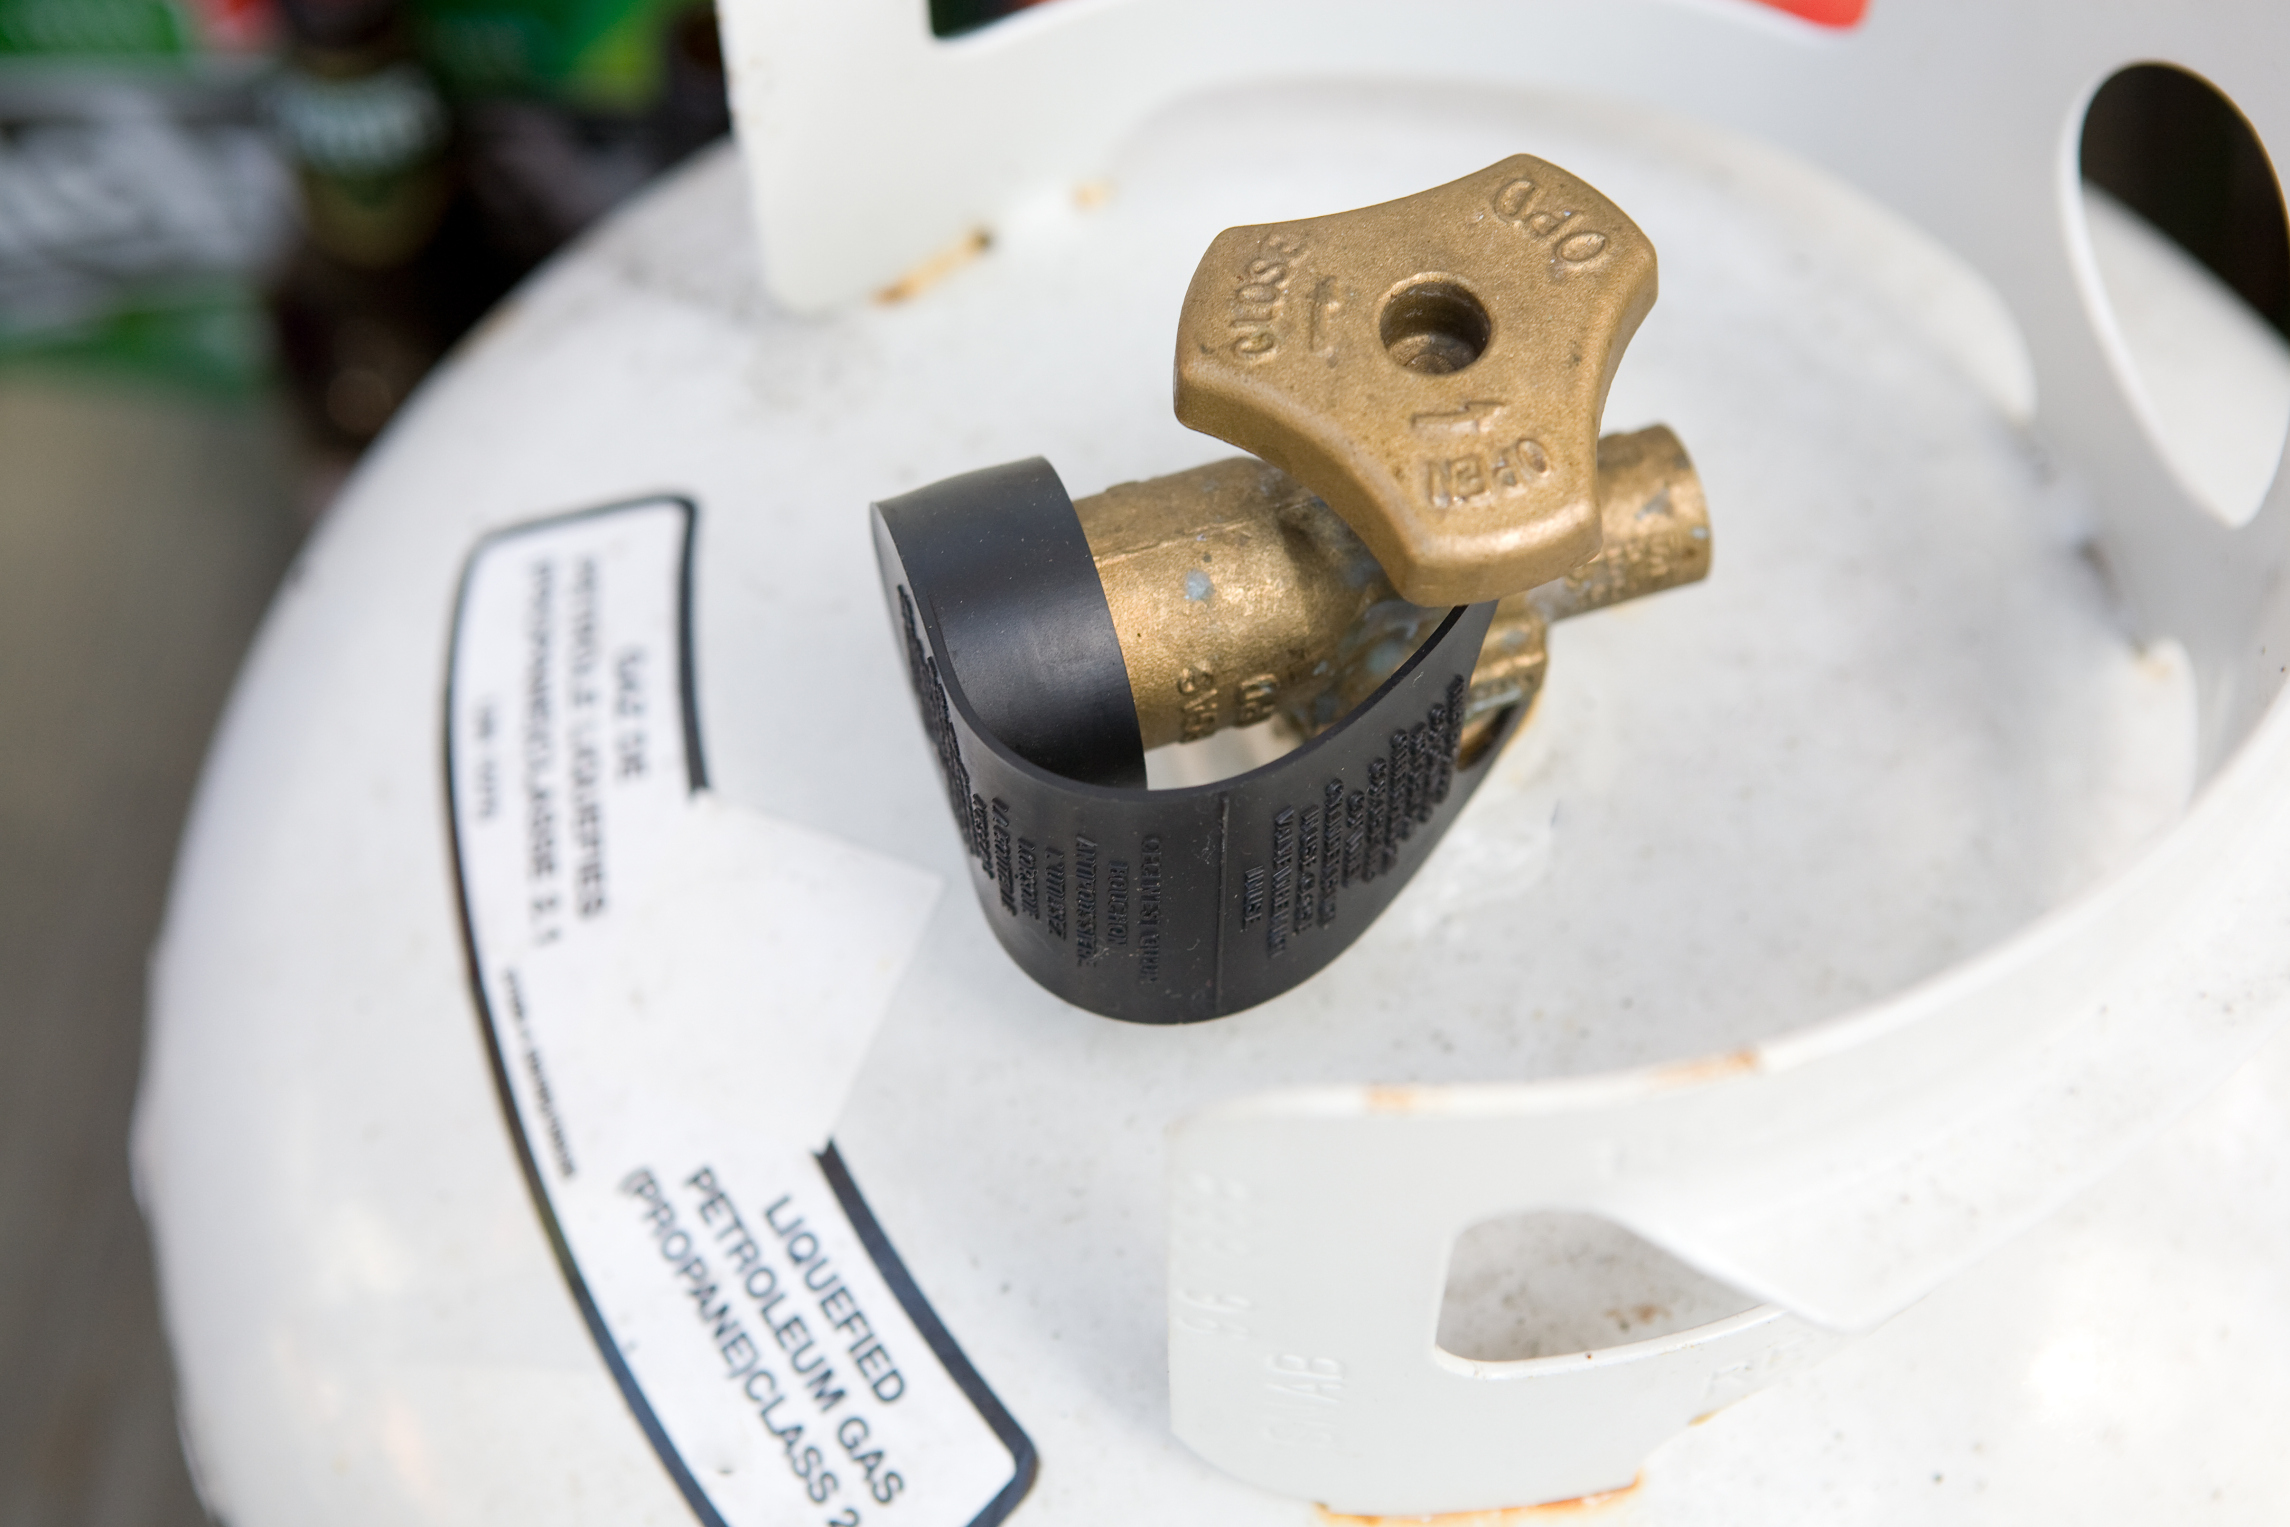 tools - Is it safe to detach and reattach this propane hose with a